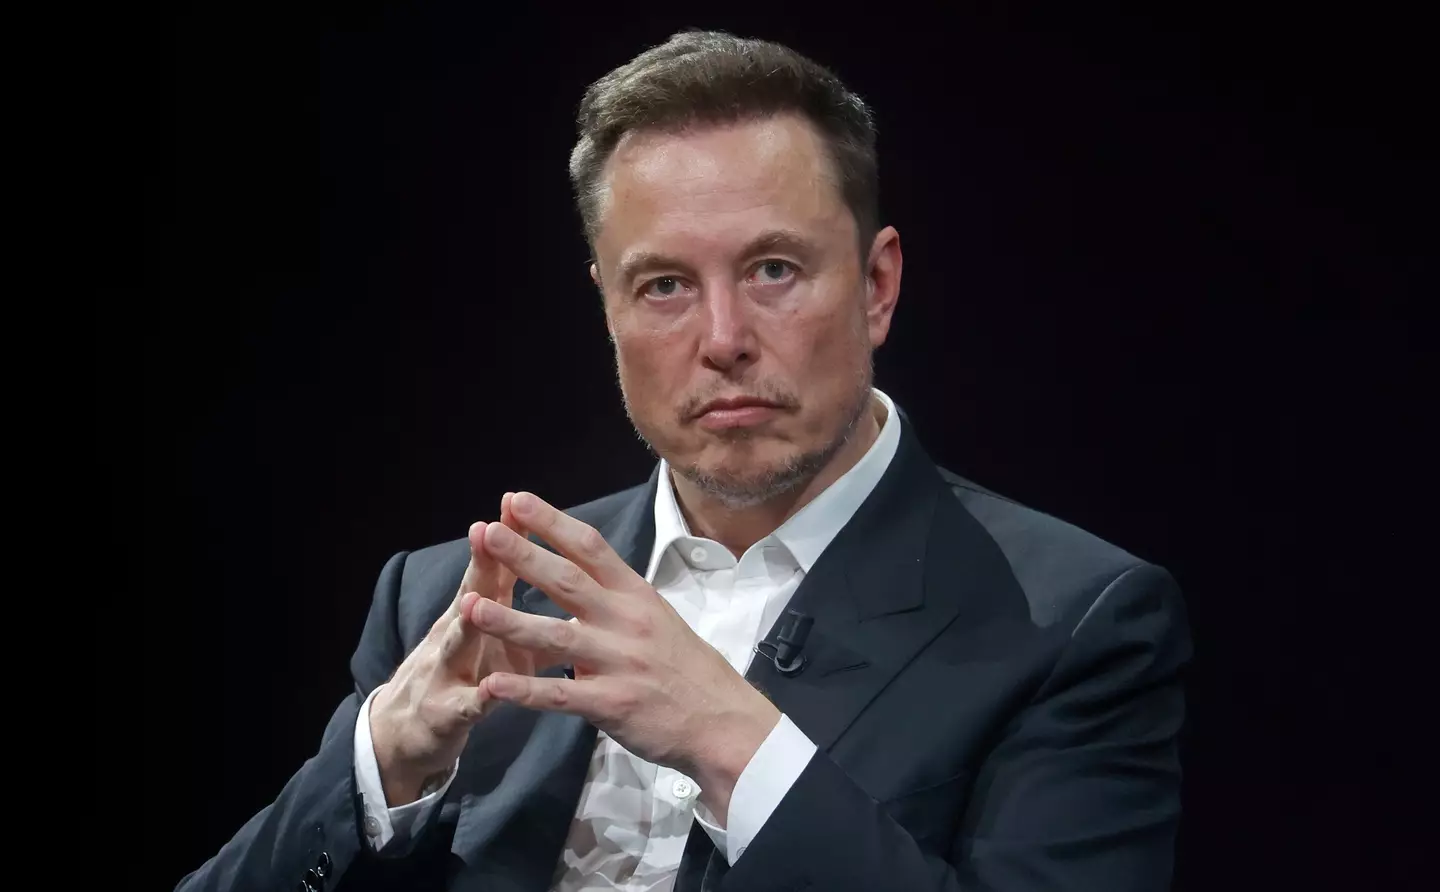 Musk has praised X for the total visits and page views